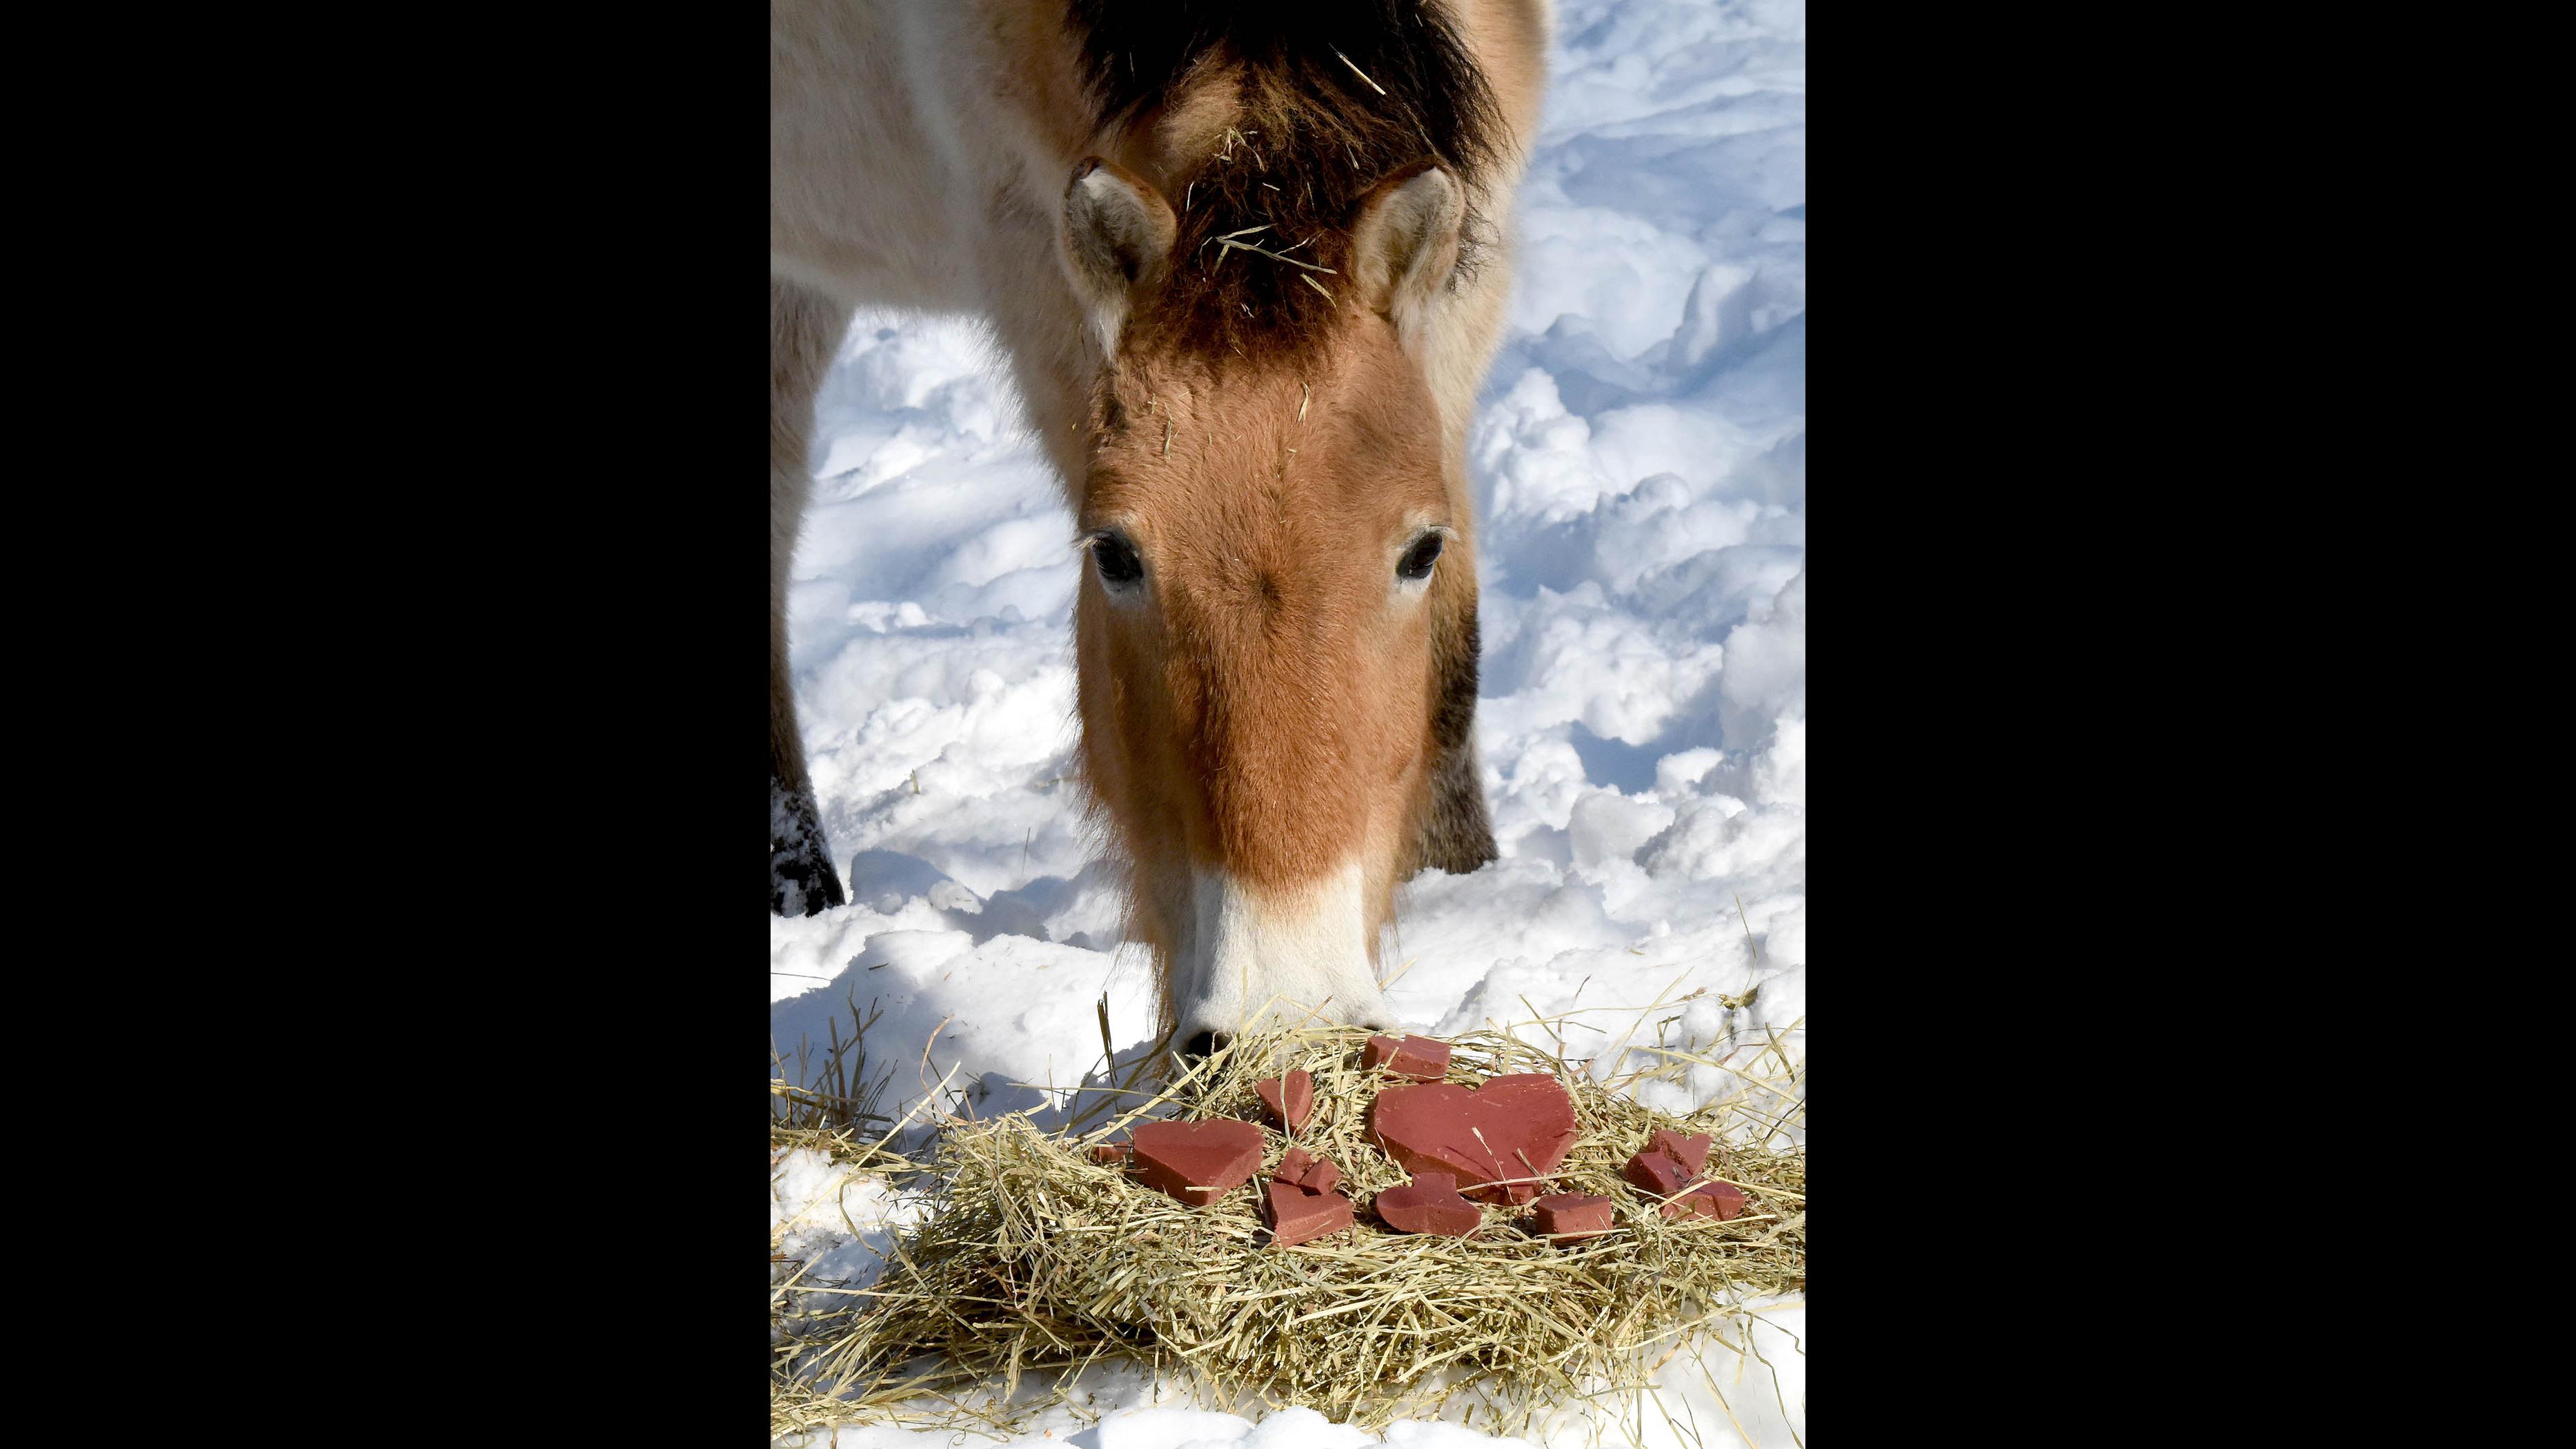 A Przewalski’s horse at Brookfield Zoo eyes a Valentine’s Day treats provided by animal care staff. (Jim Schulz / Chicago Zoological Society)